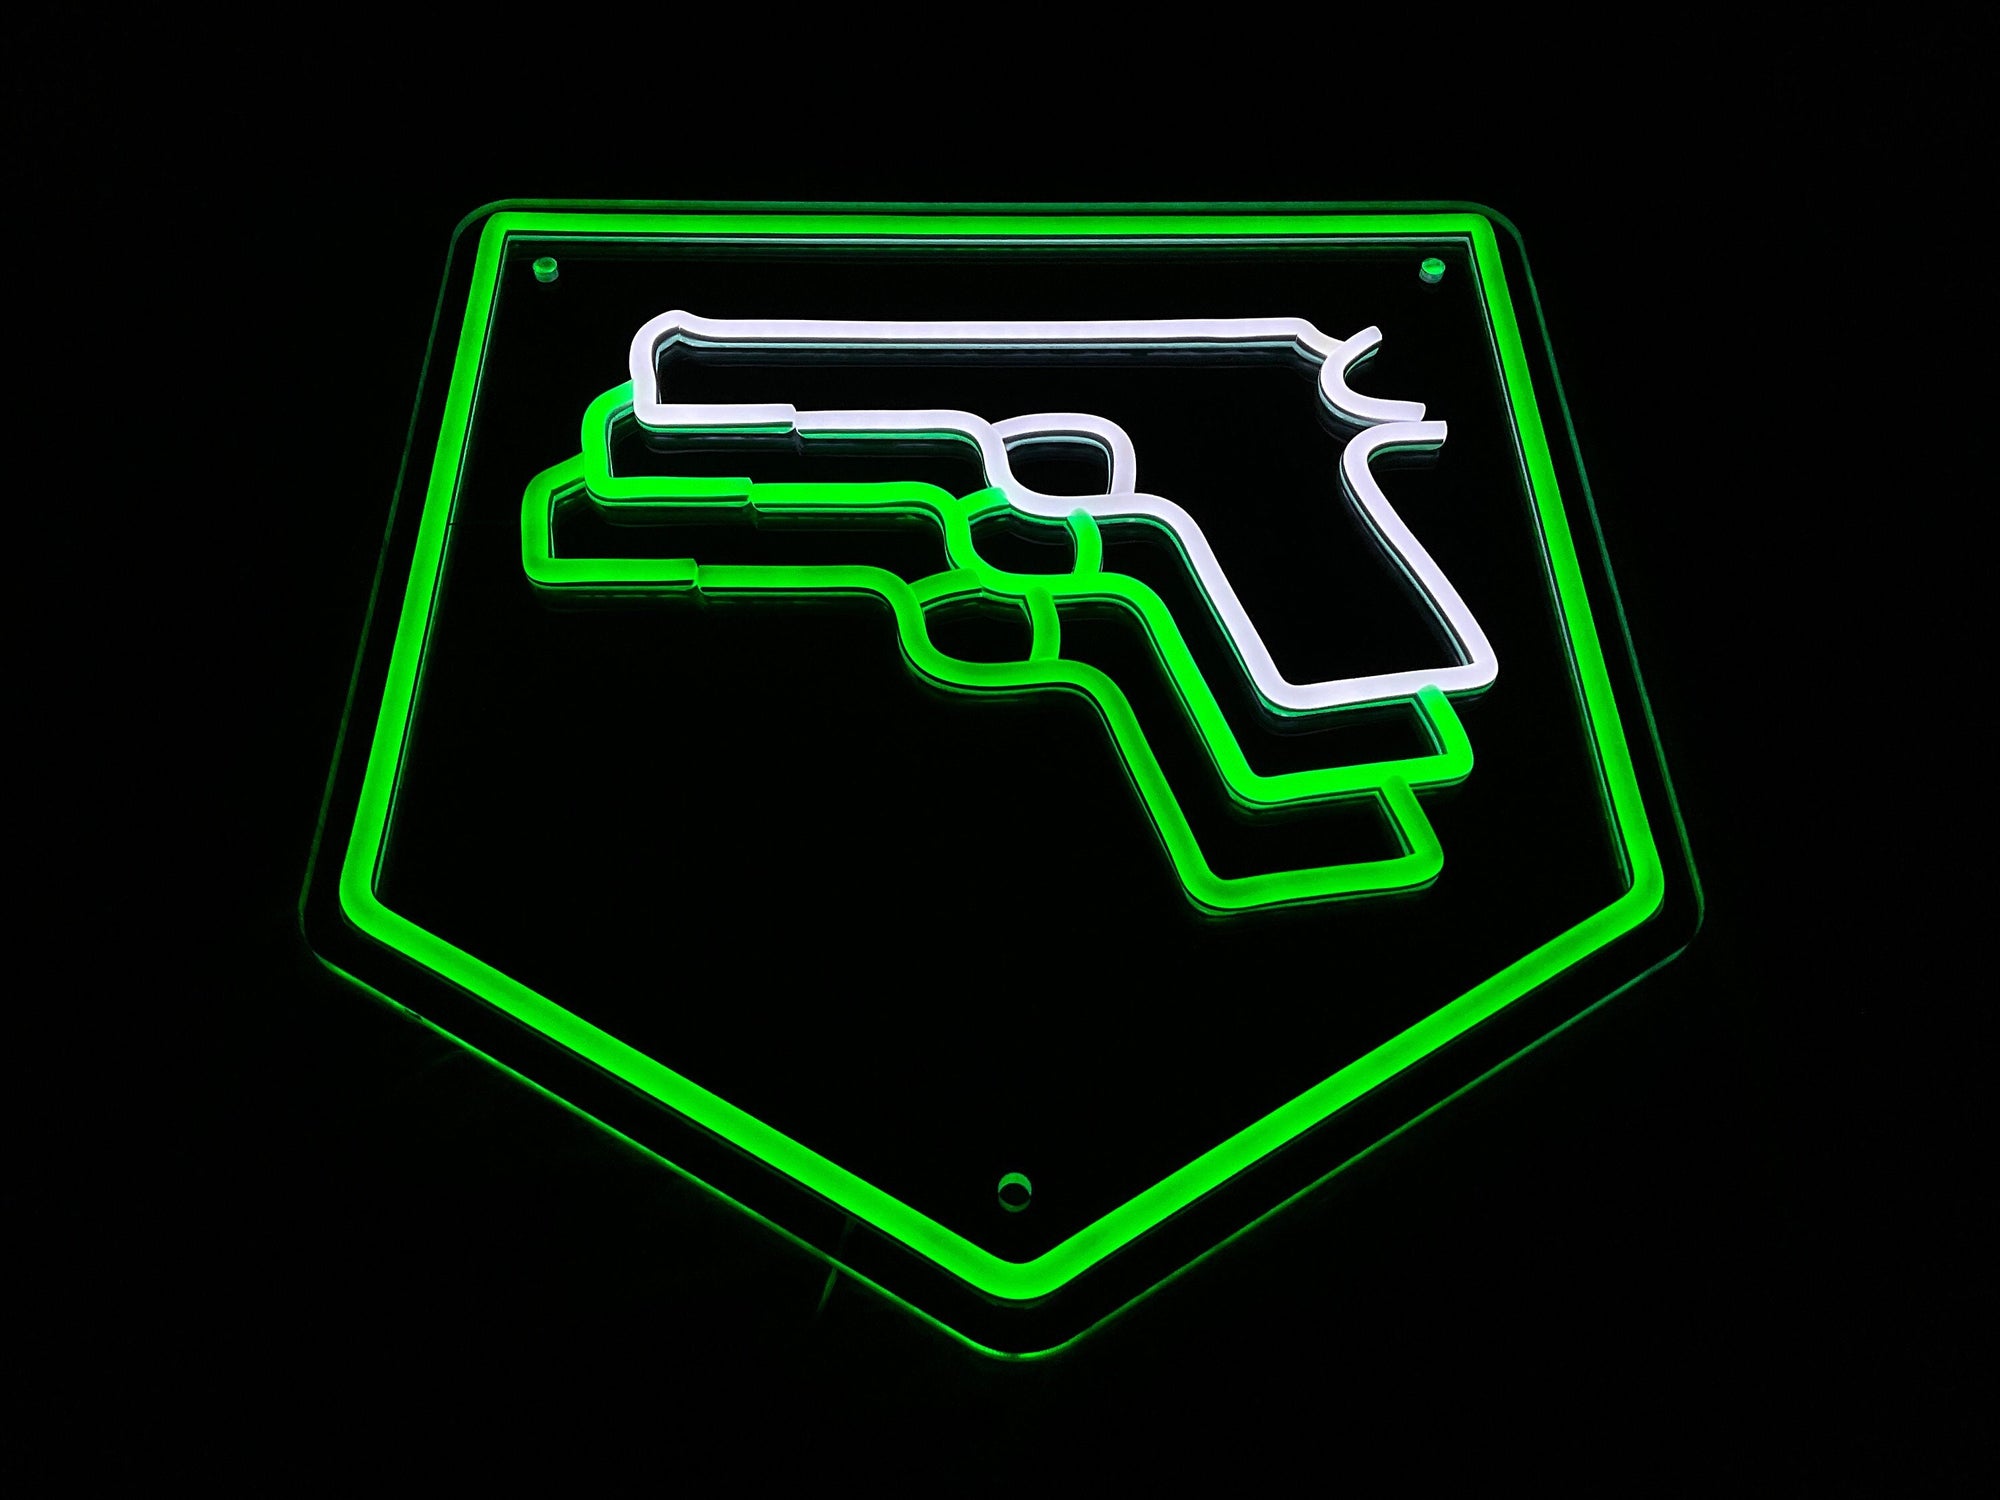 Mule Kick - Neon Sign - COD LED Sign - Game Room or Mancave